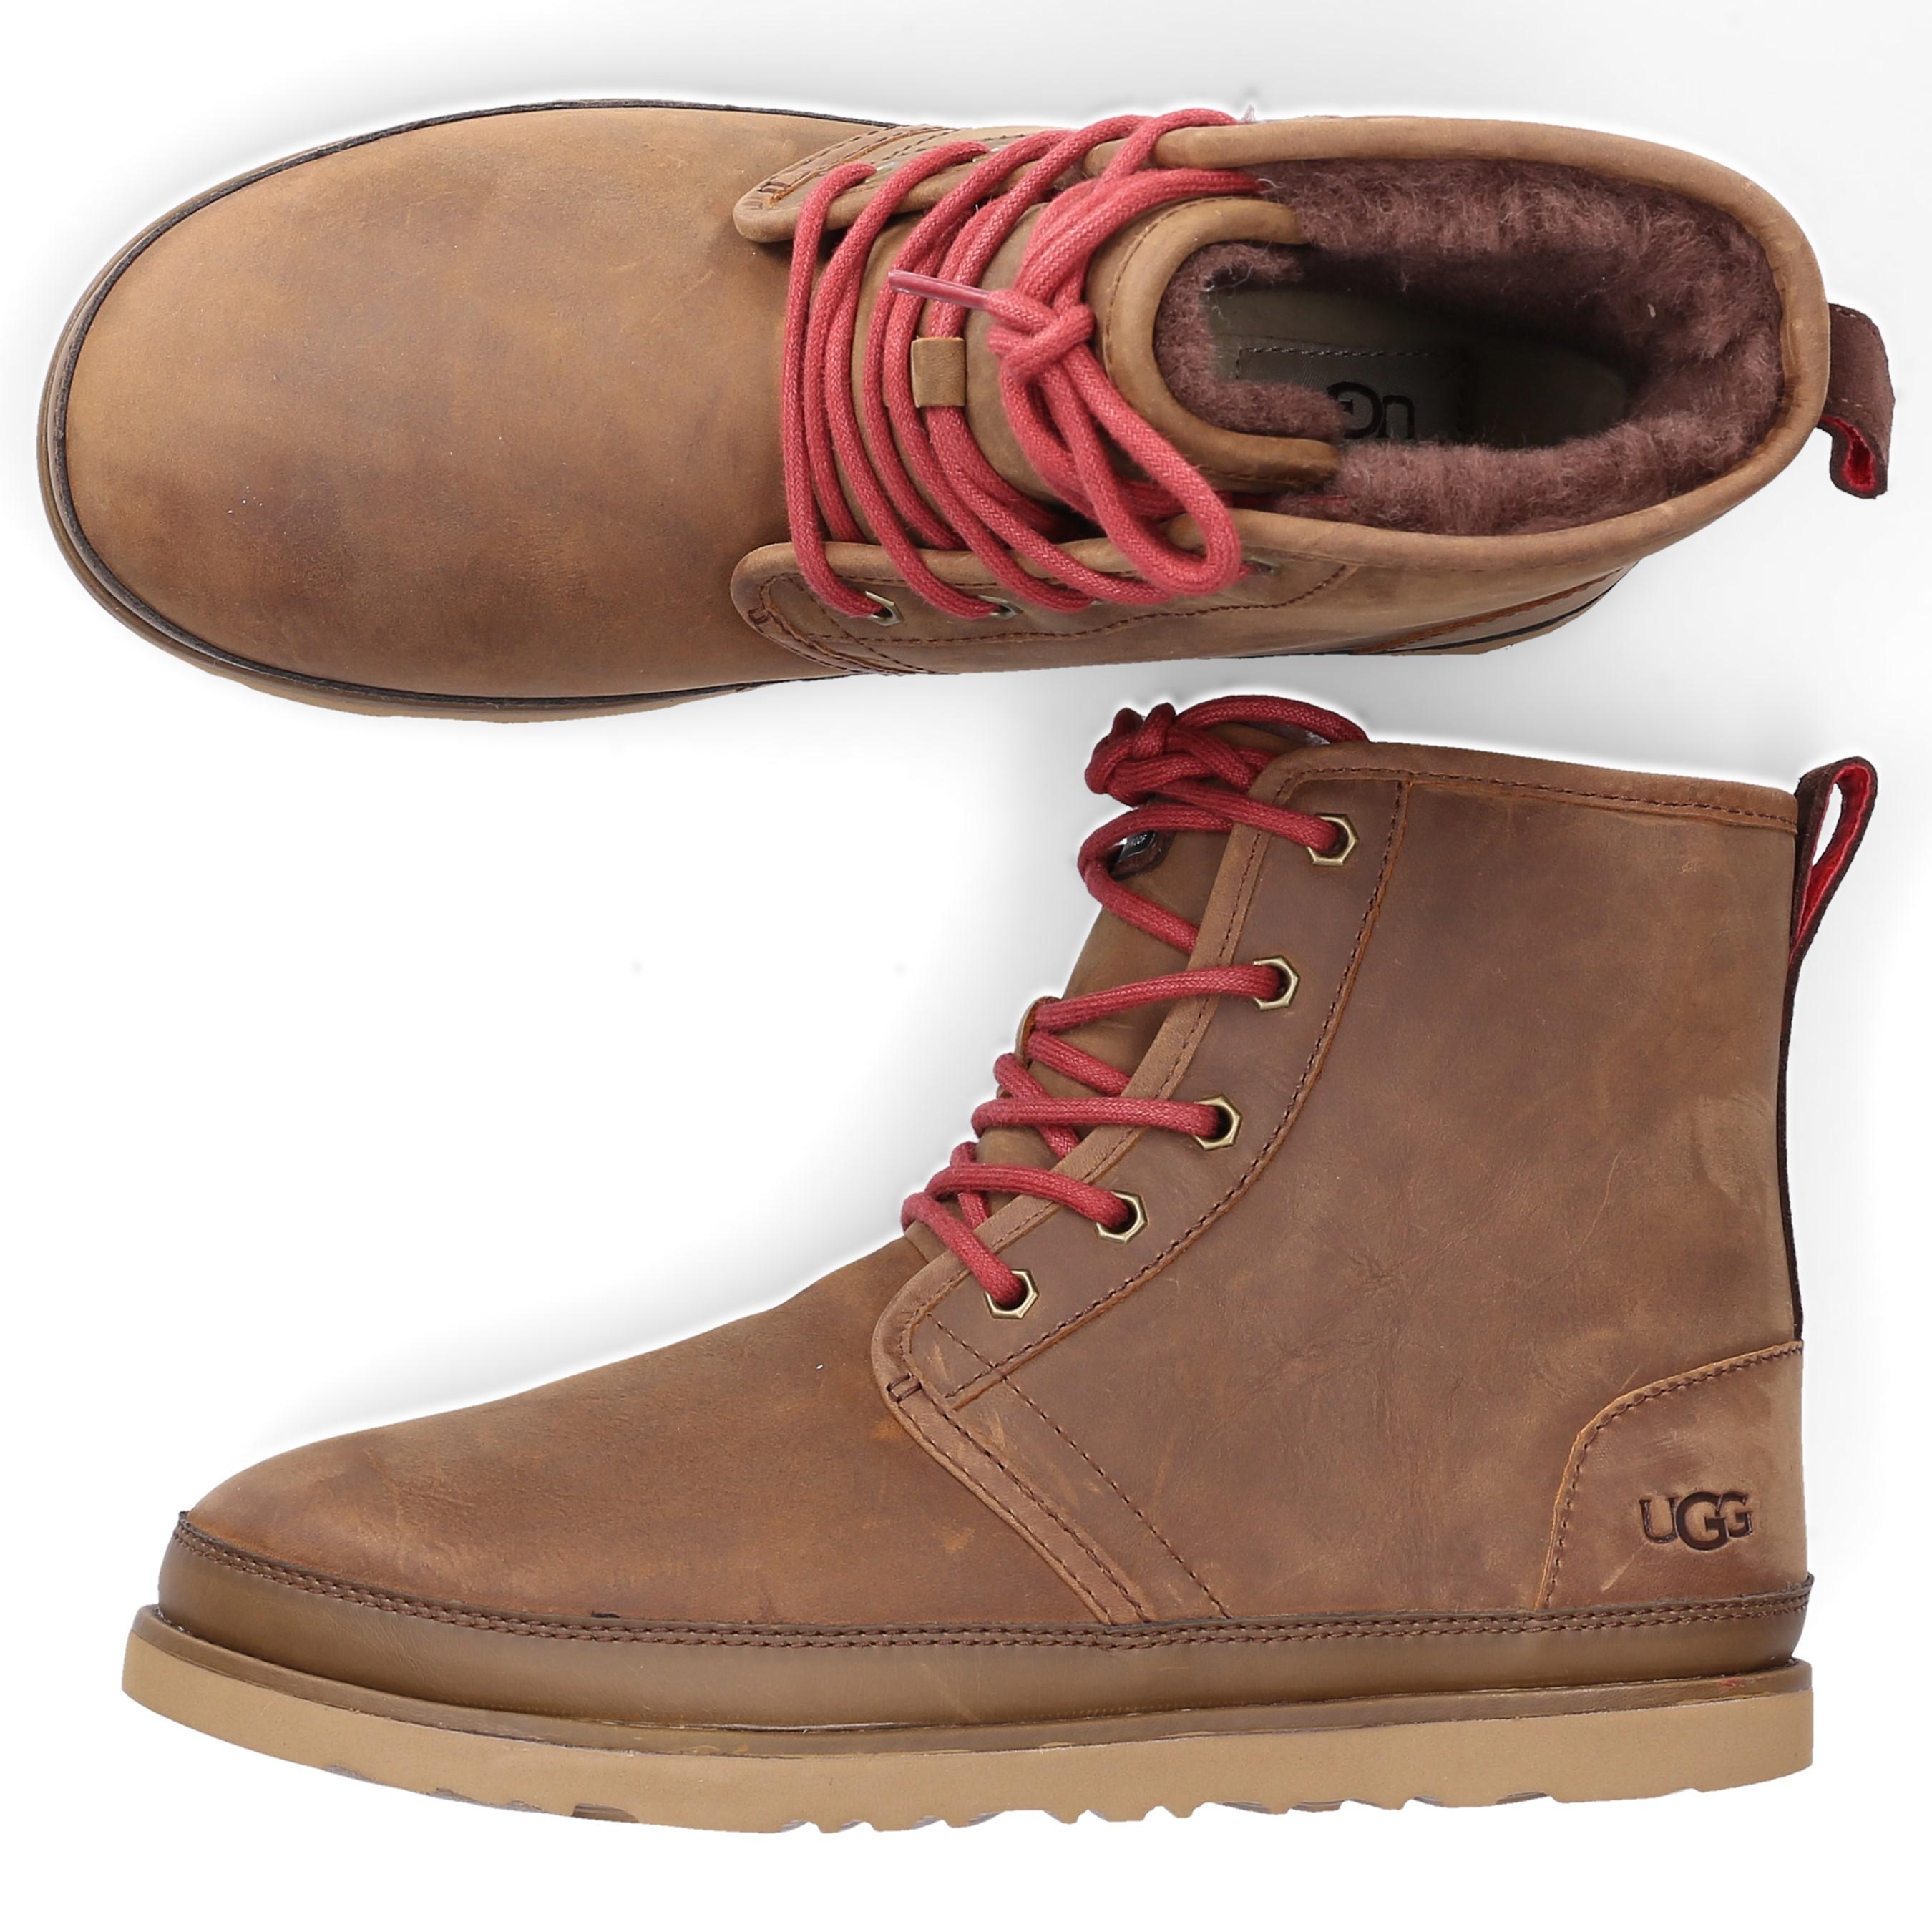 UGG Leather Harkley Waterproof Boots in Chestnut (Brown) for Men - Save 51%  | Lyst